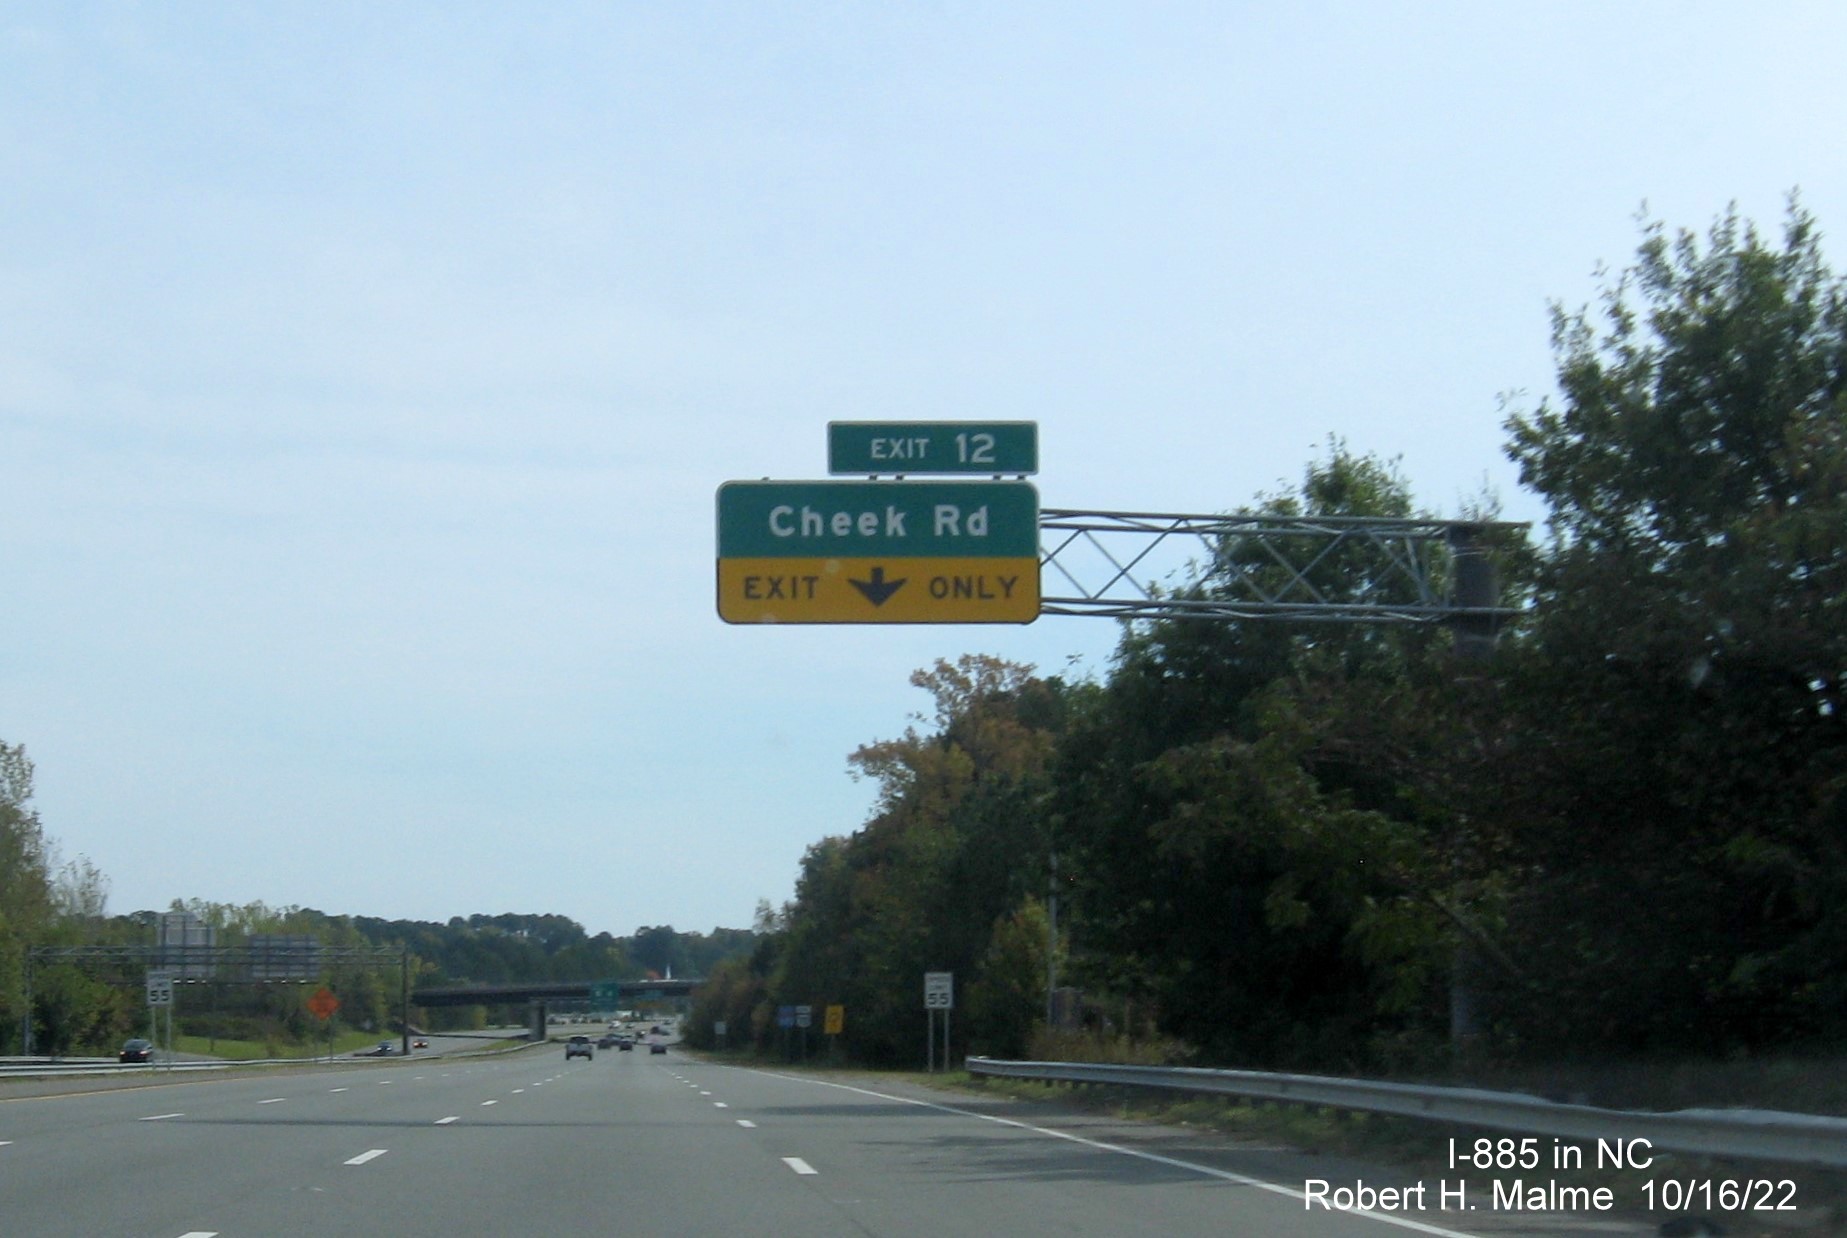 Image of 1/2 Mile advance overhead sign for Cheek Road exit with new I-885 exit number on I-885 South/US 70 East in Durham, October 2022